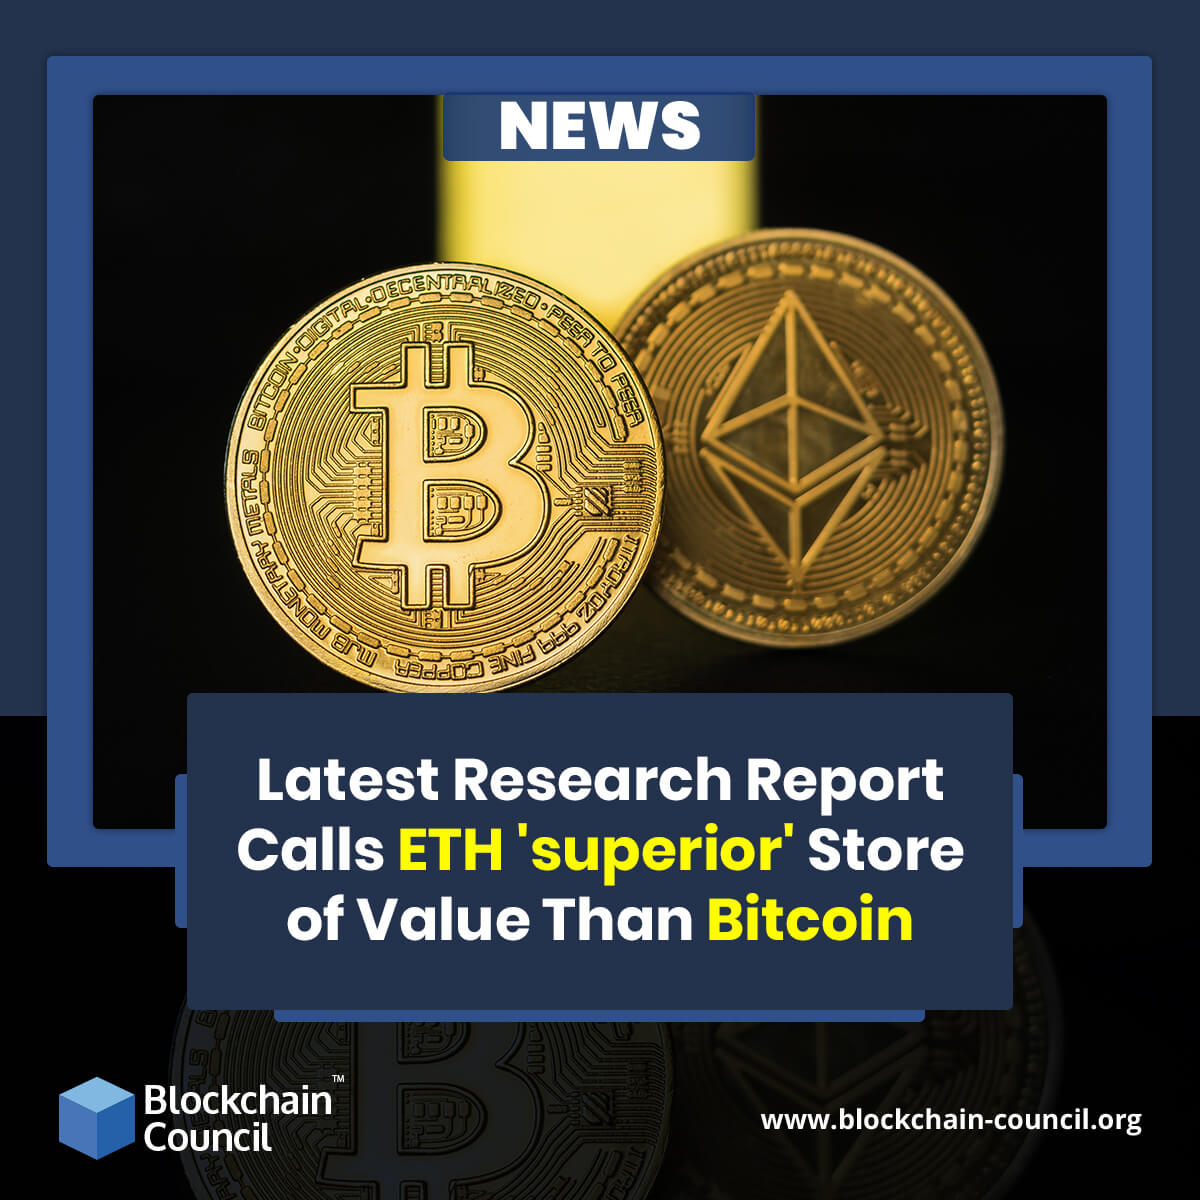 The latest research report says ETH is more valuable than Bitcoin